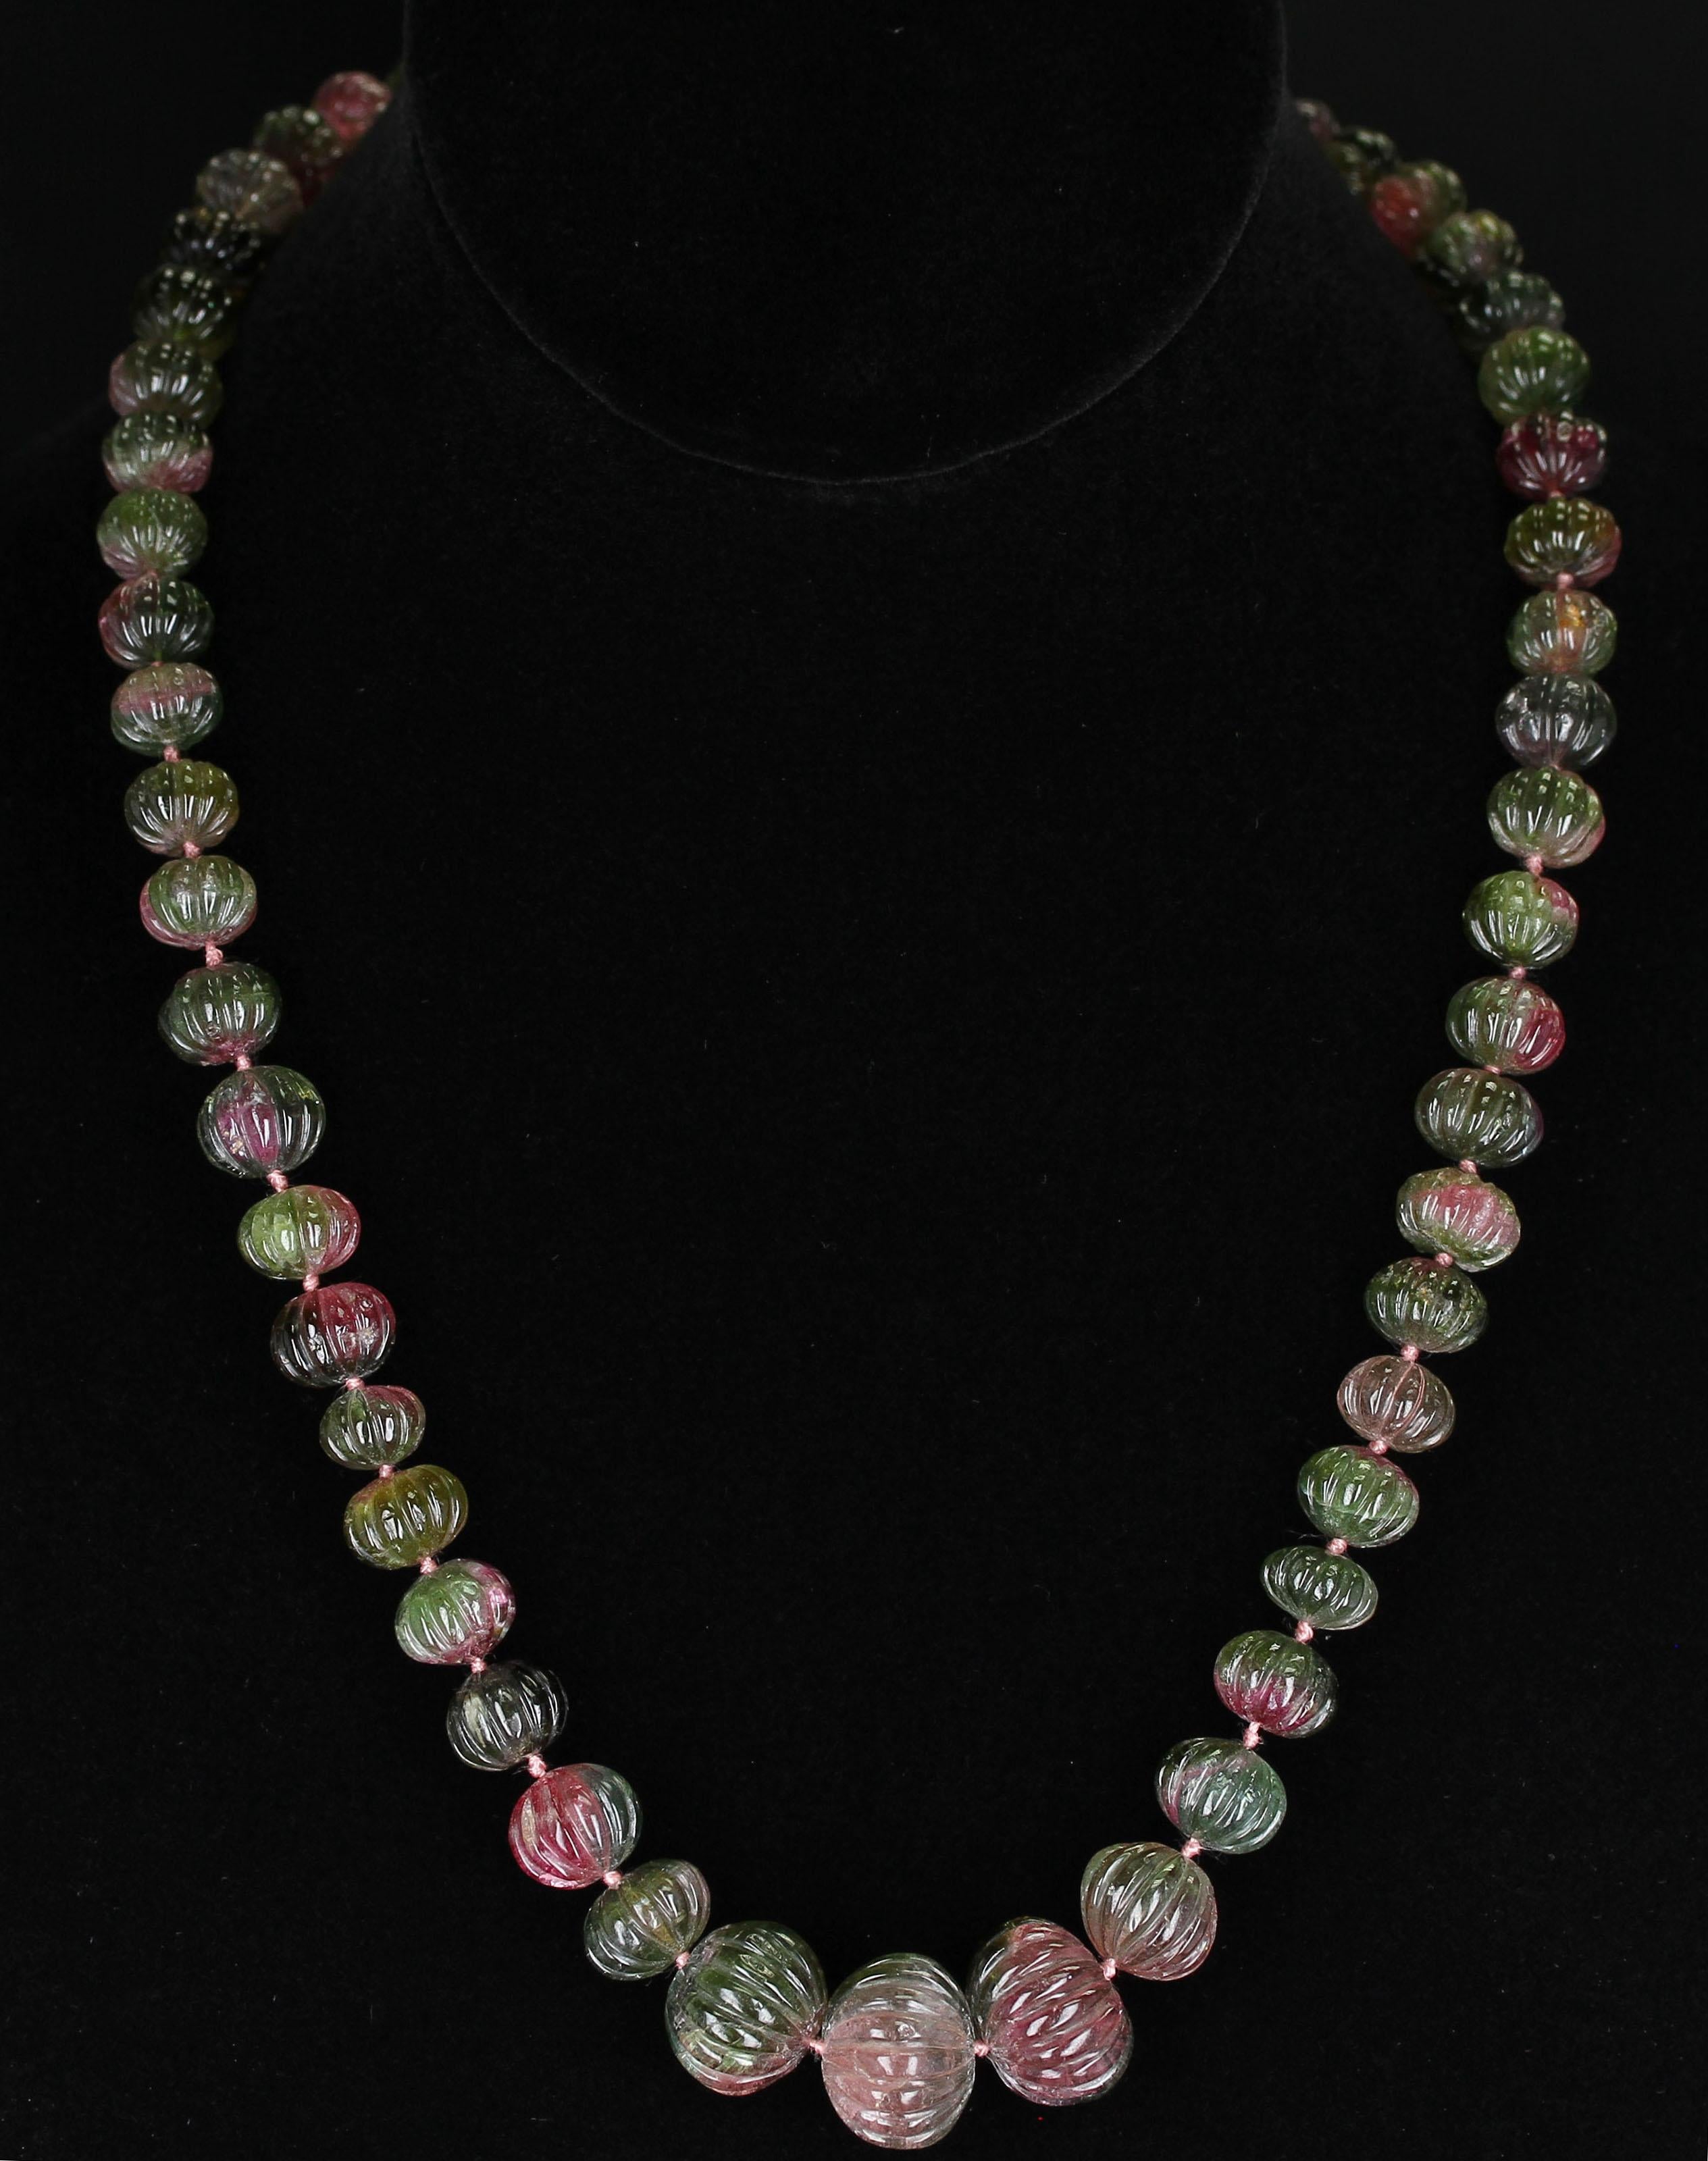 A Genuine & Natural Watermelon Tourmaline Carved Beads Necklace weighing 408 carats. The length is 20.5 Inches and the beads range from 9MM to 17MM. We can also customize the necklace according to your preferences, as per the number of strands, the